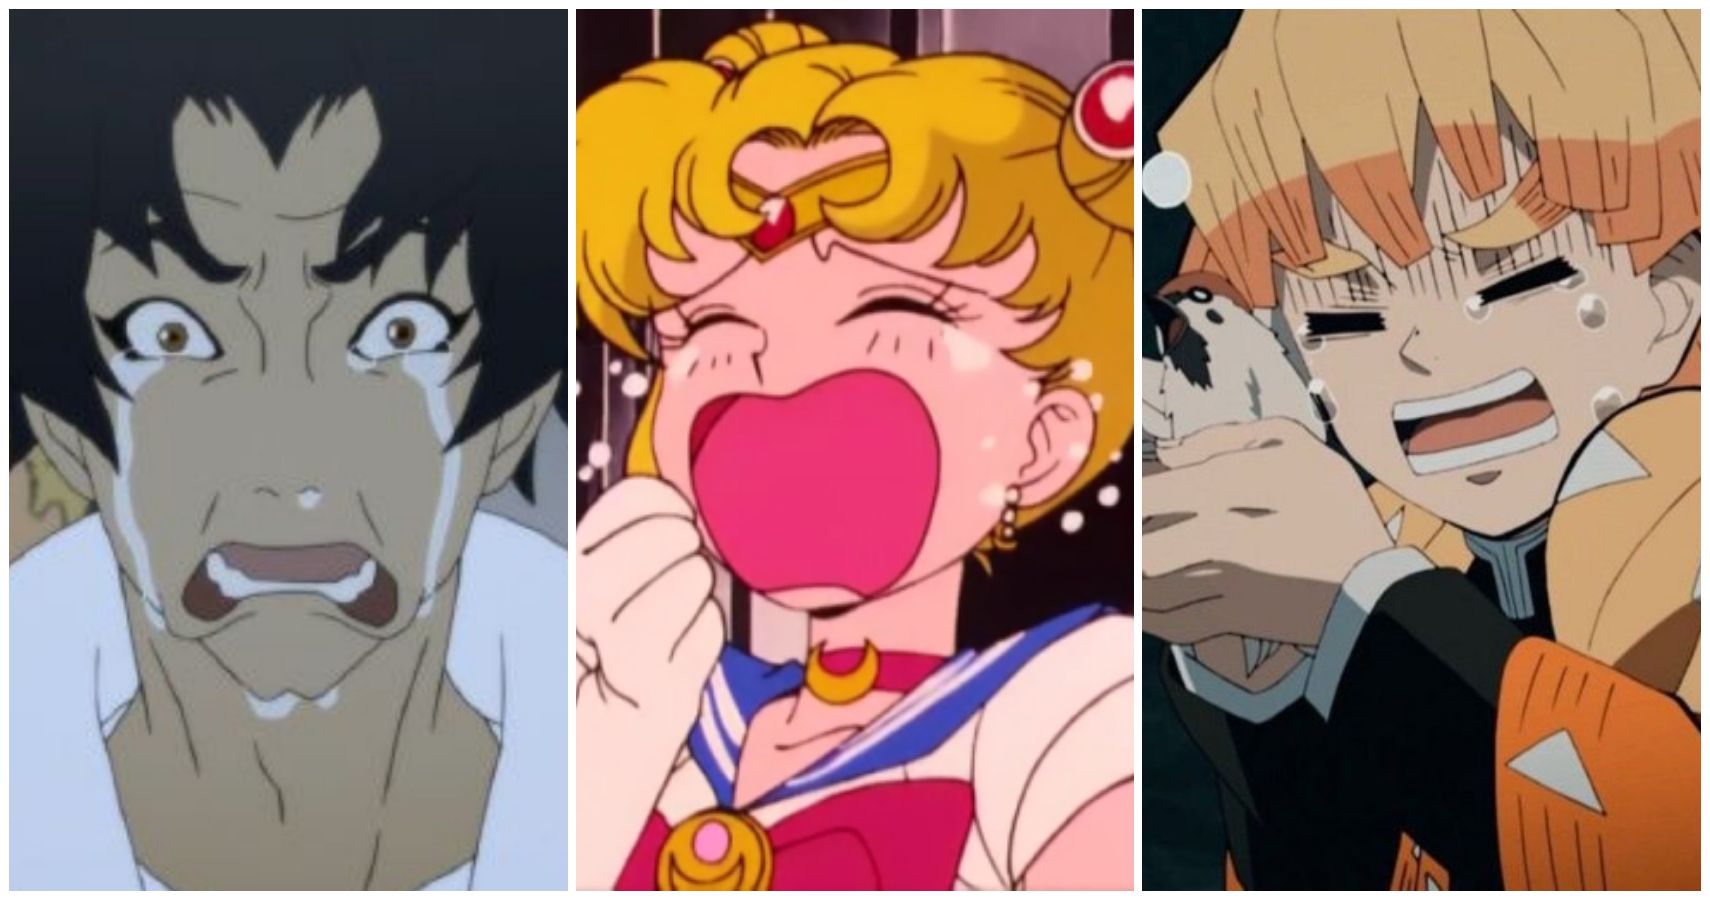 What anime character cries the most? - Quora